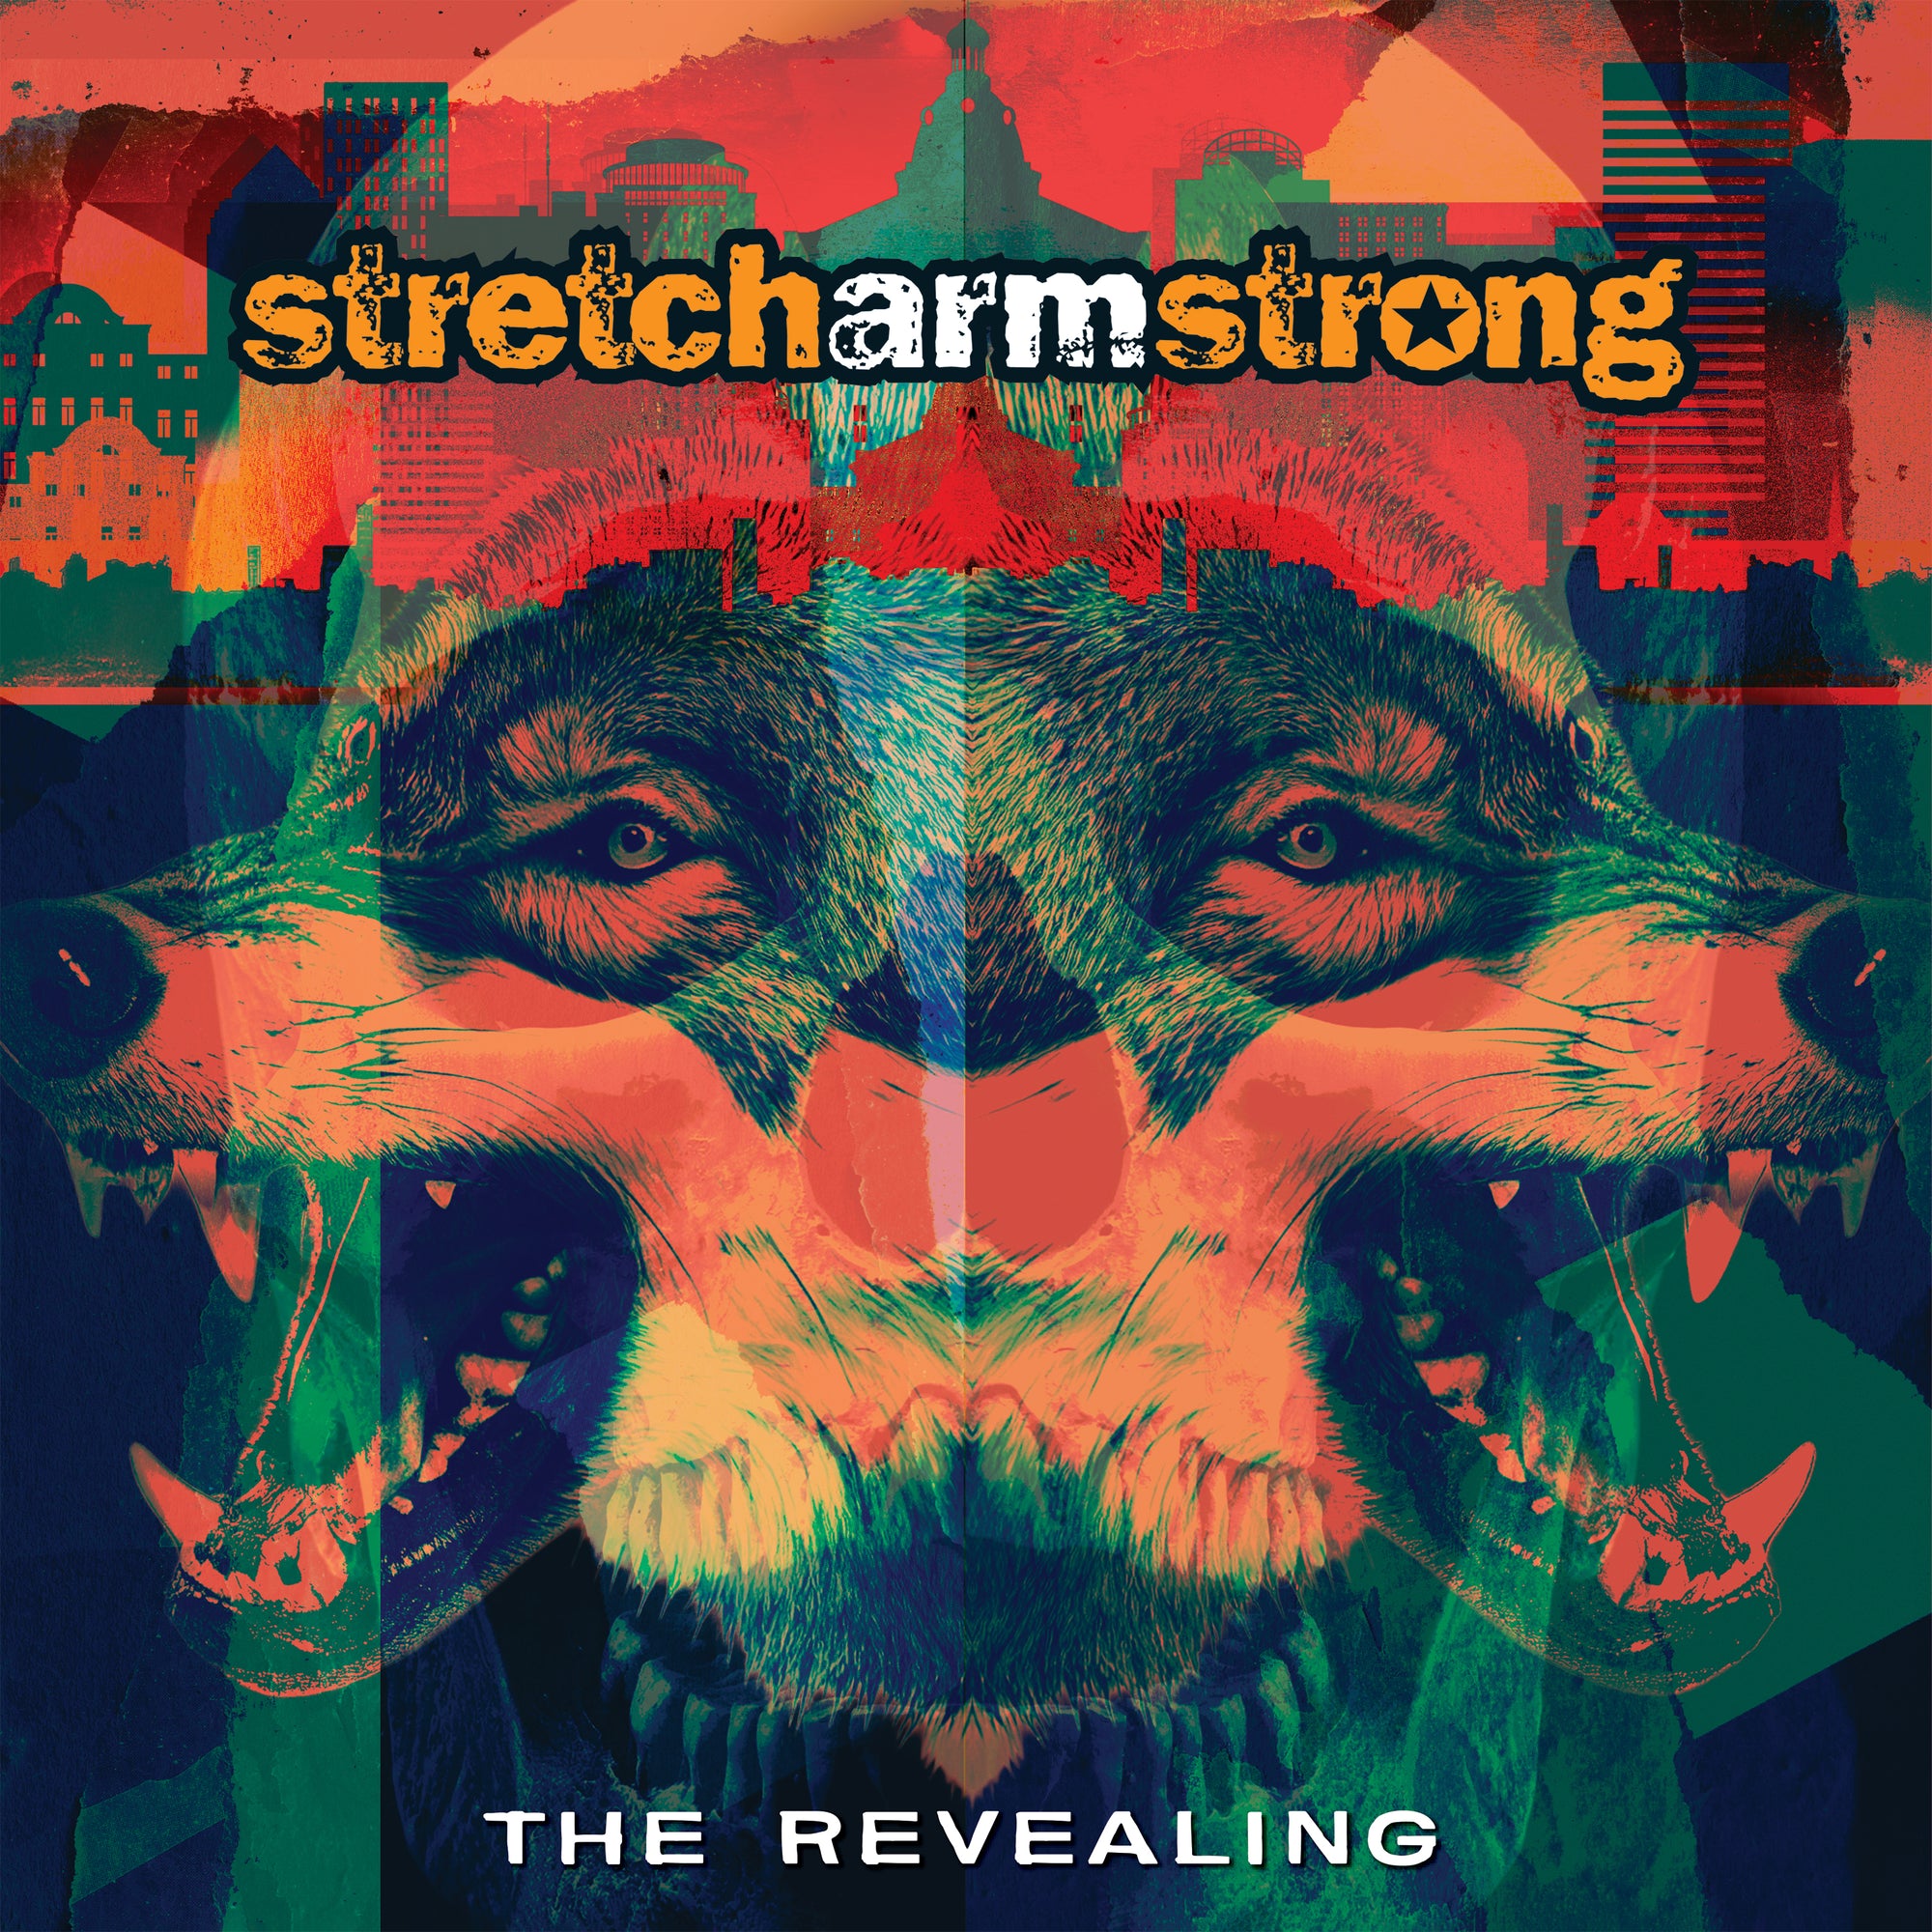 STRETCH ARM STRONG "The Revealing" LP